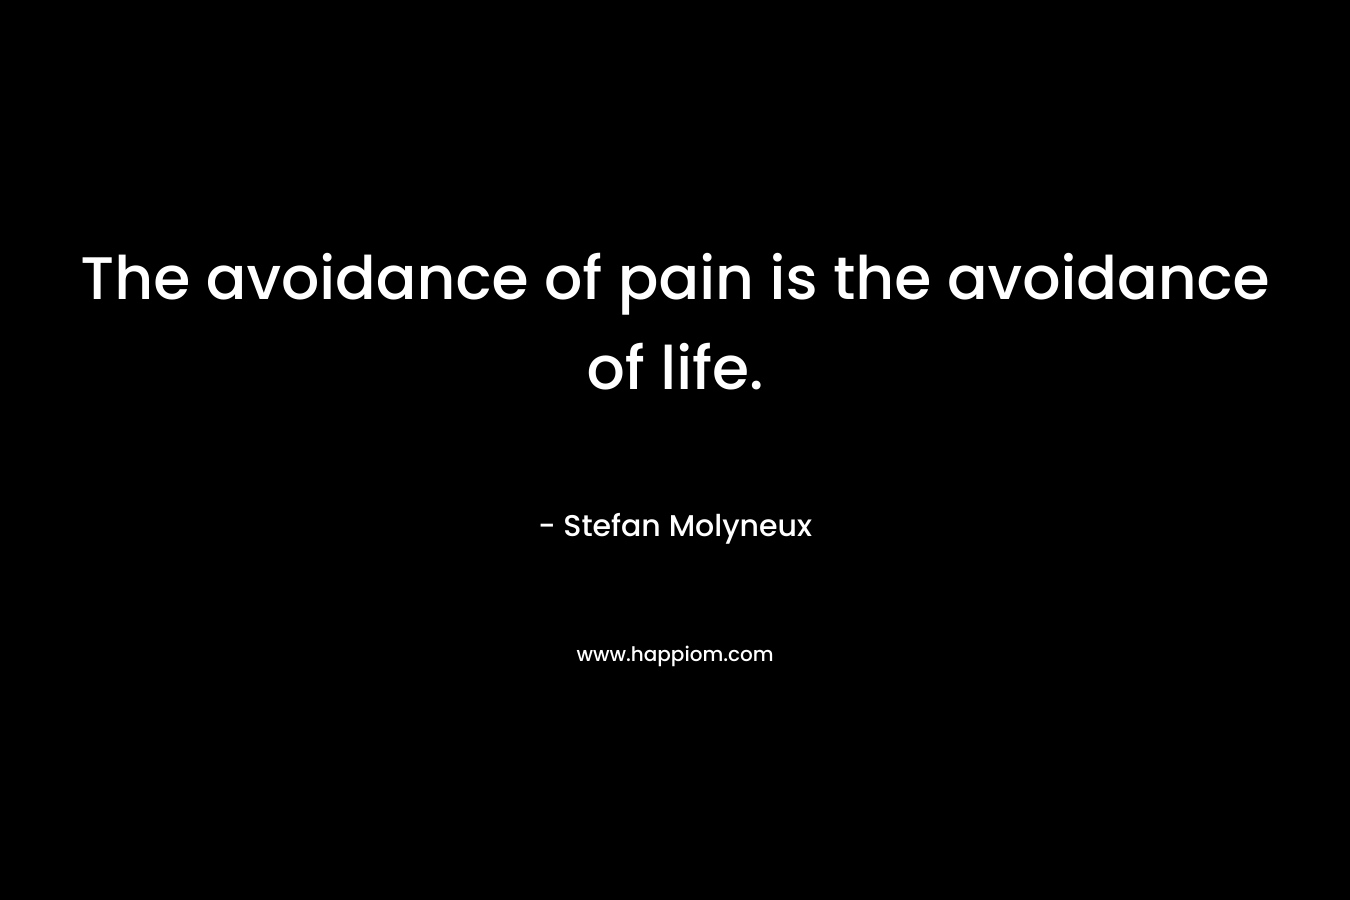 The avoidance of pain is the avoidance of life.